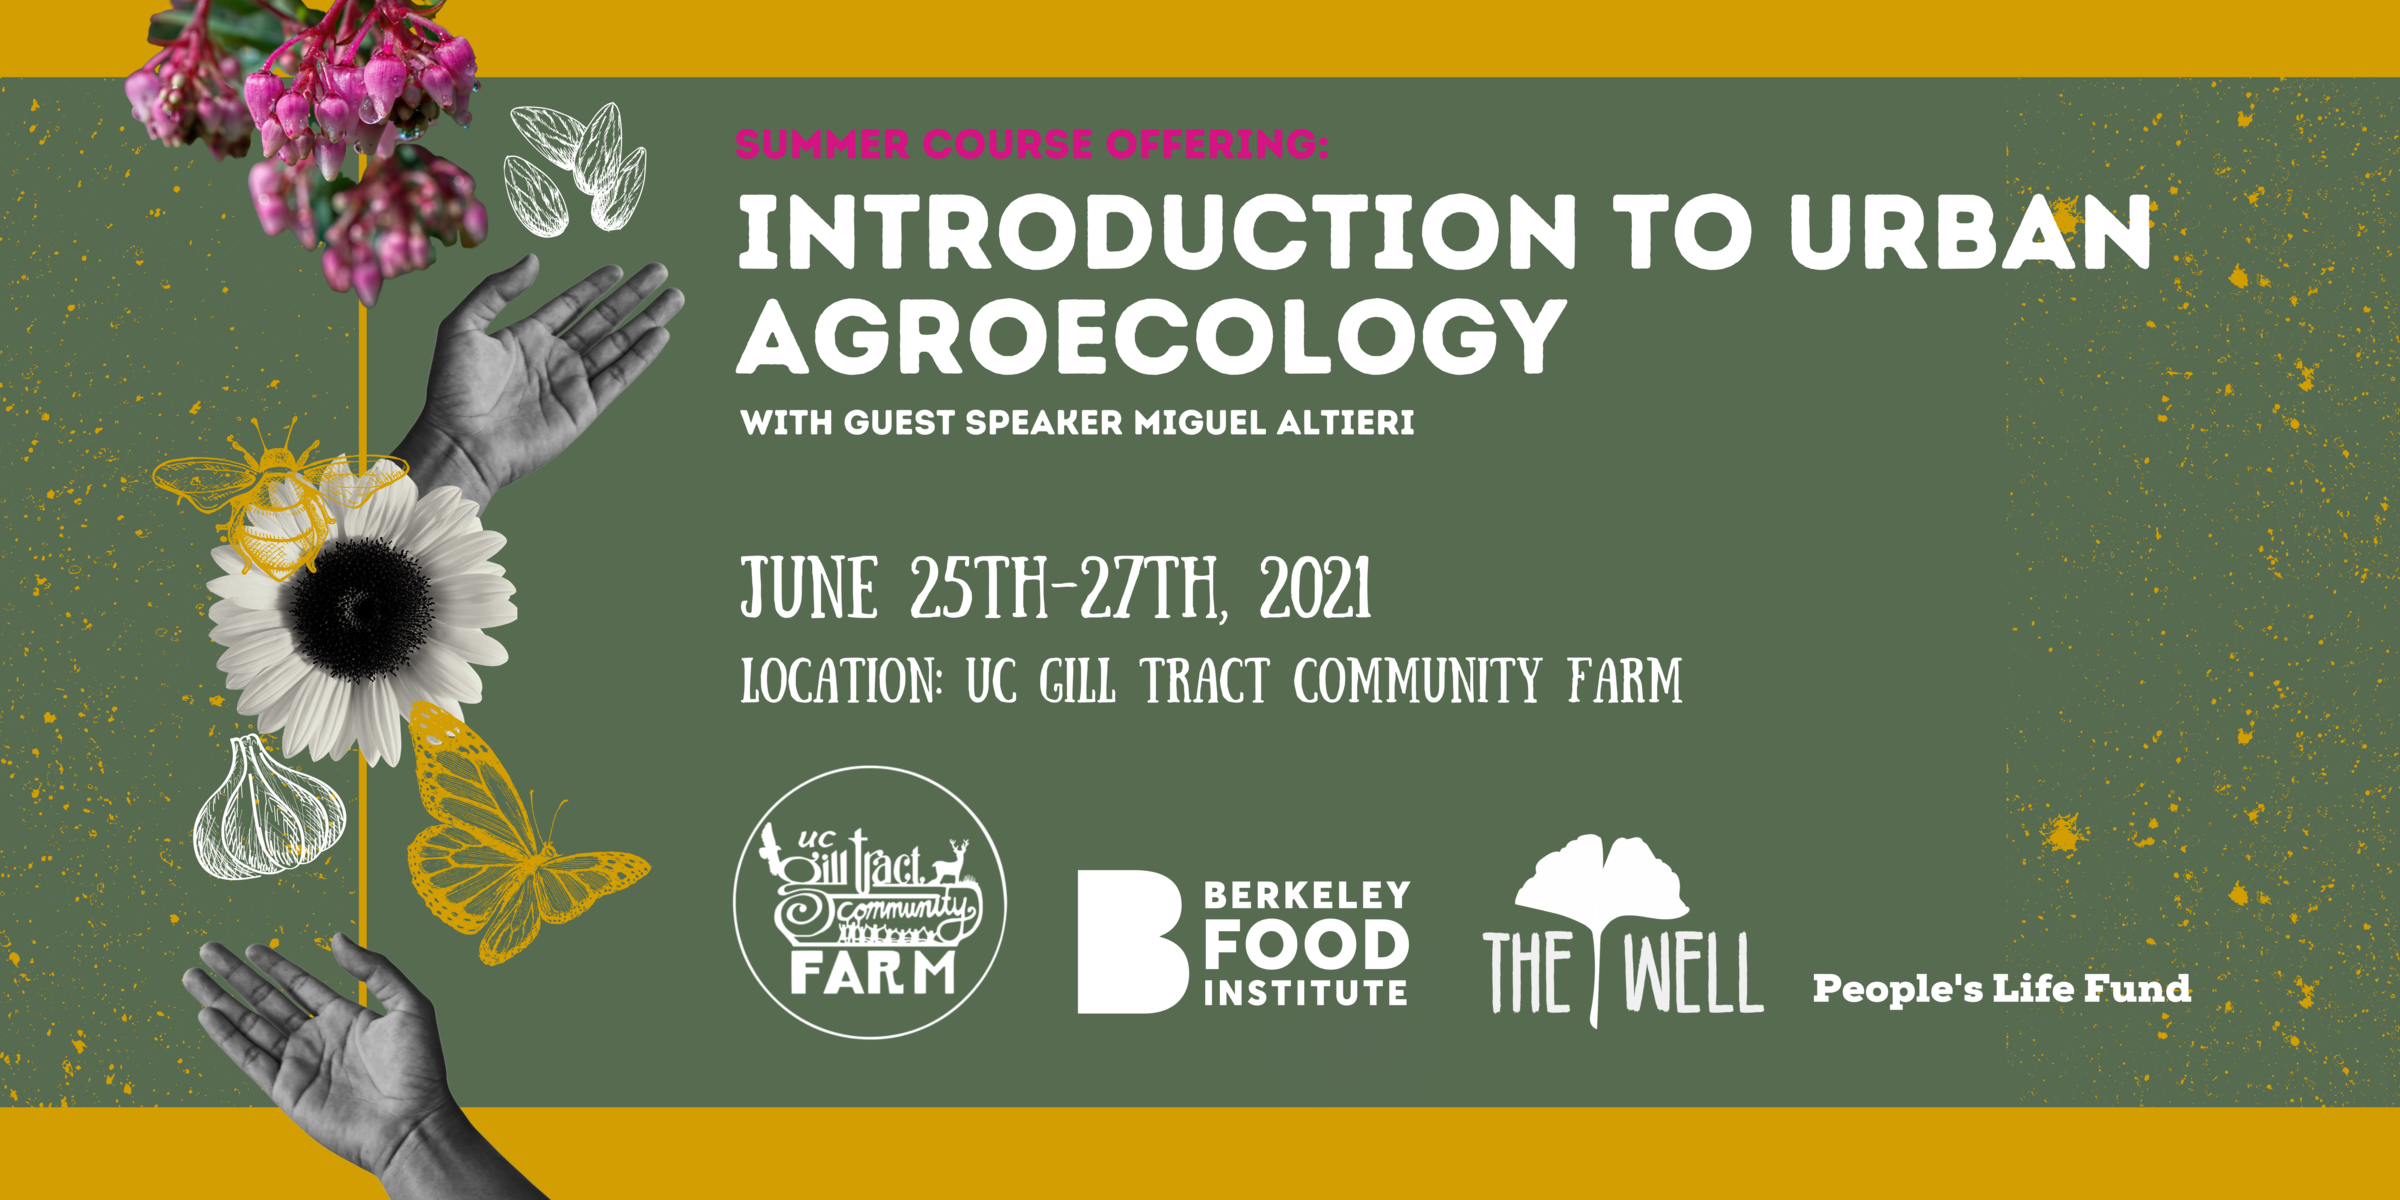 Introduction to Urban Agroecology